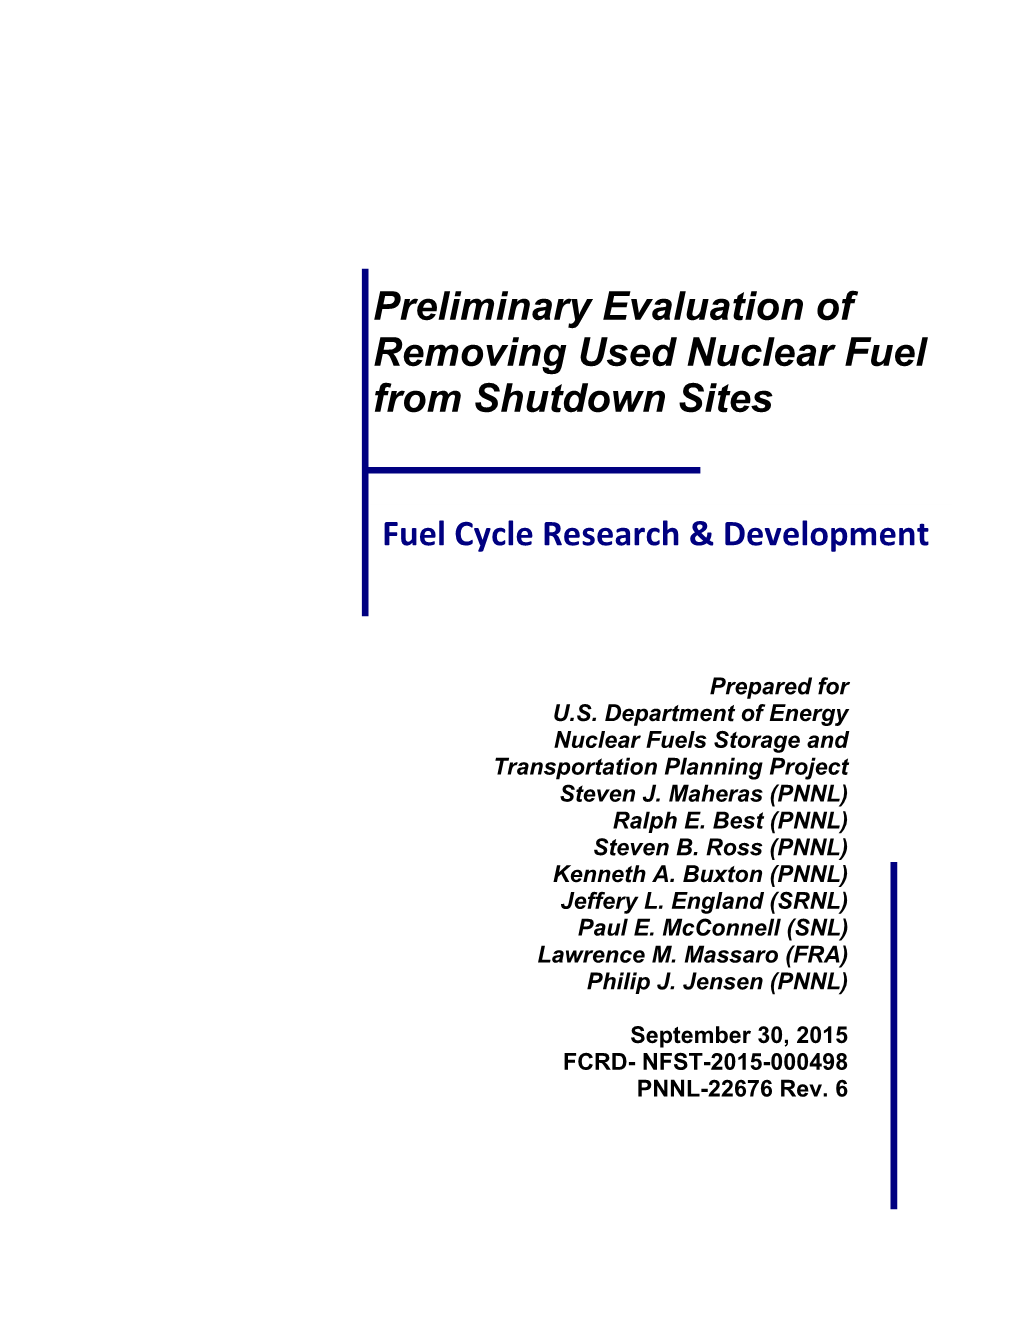 Preliminary Evaluation of Removing Used Nuclear Fuel from Shutdown Sites